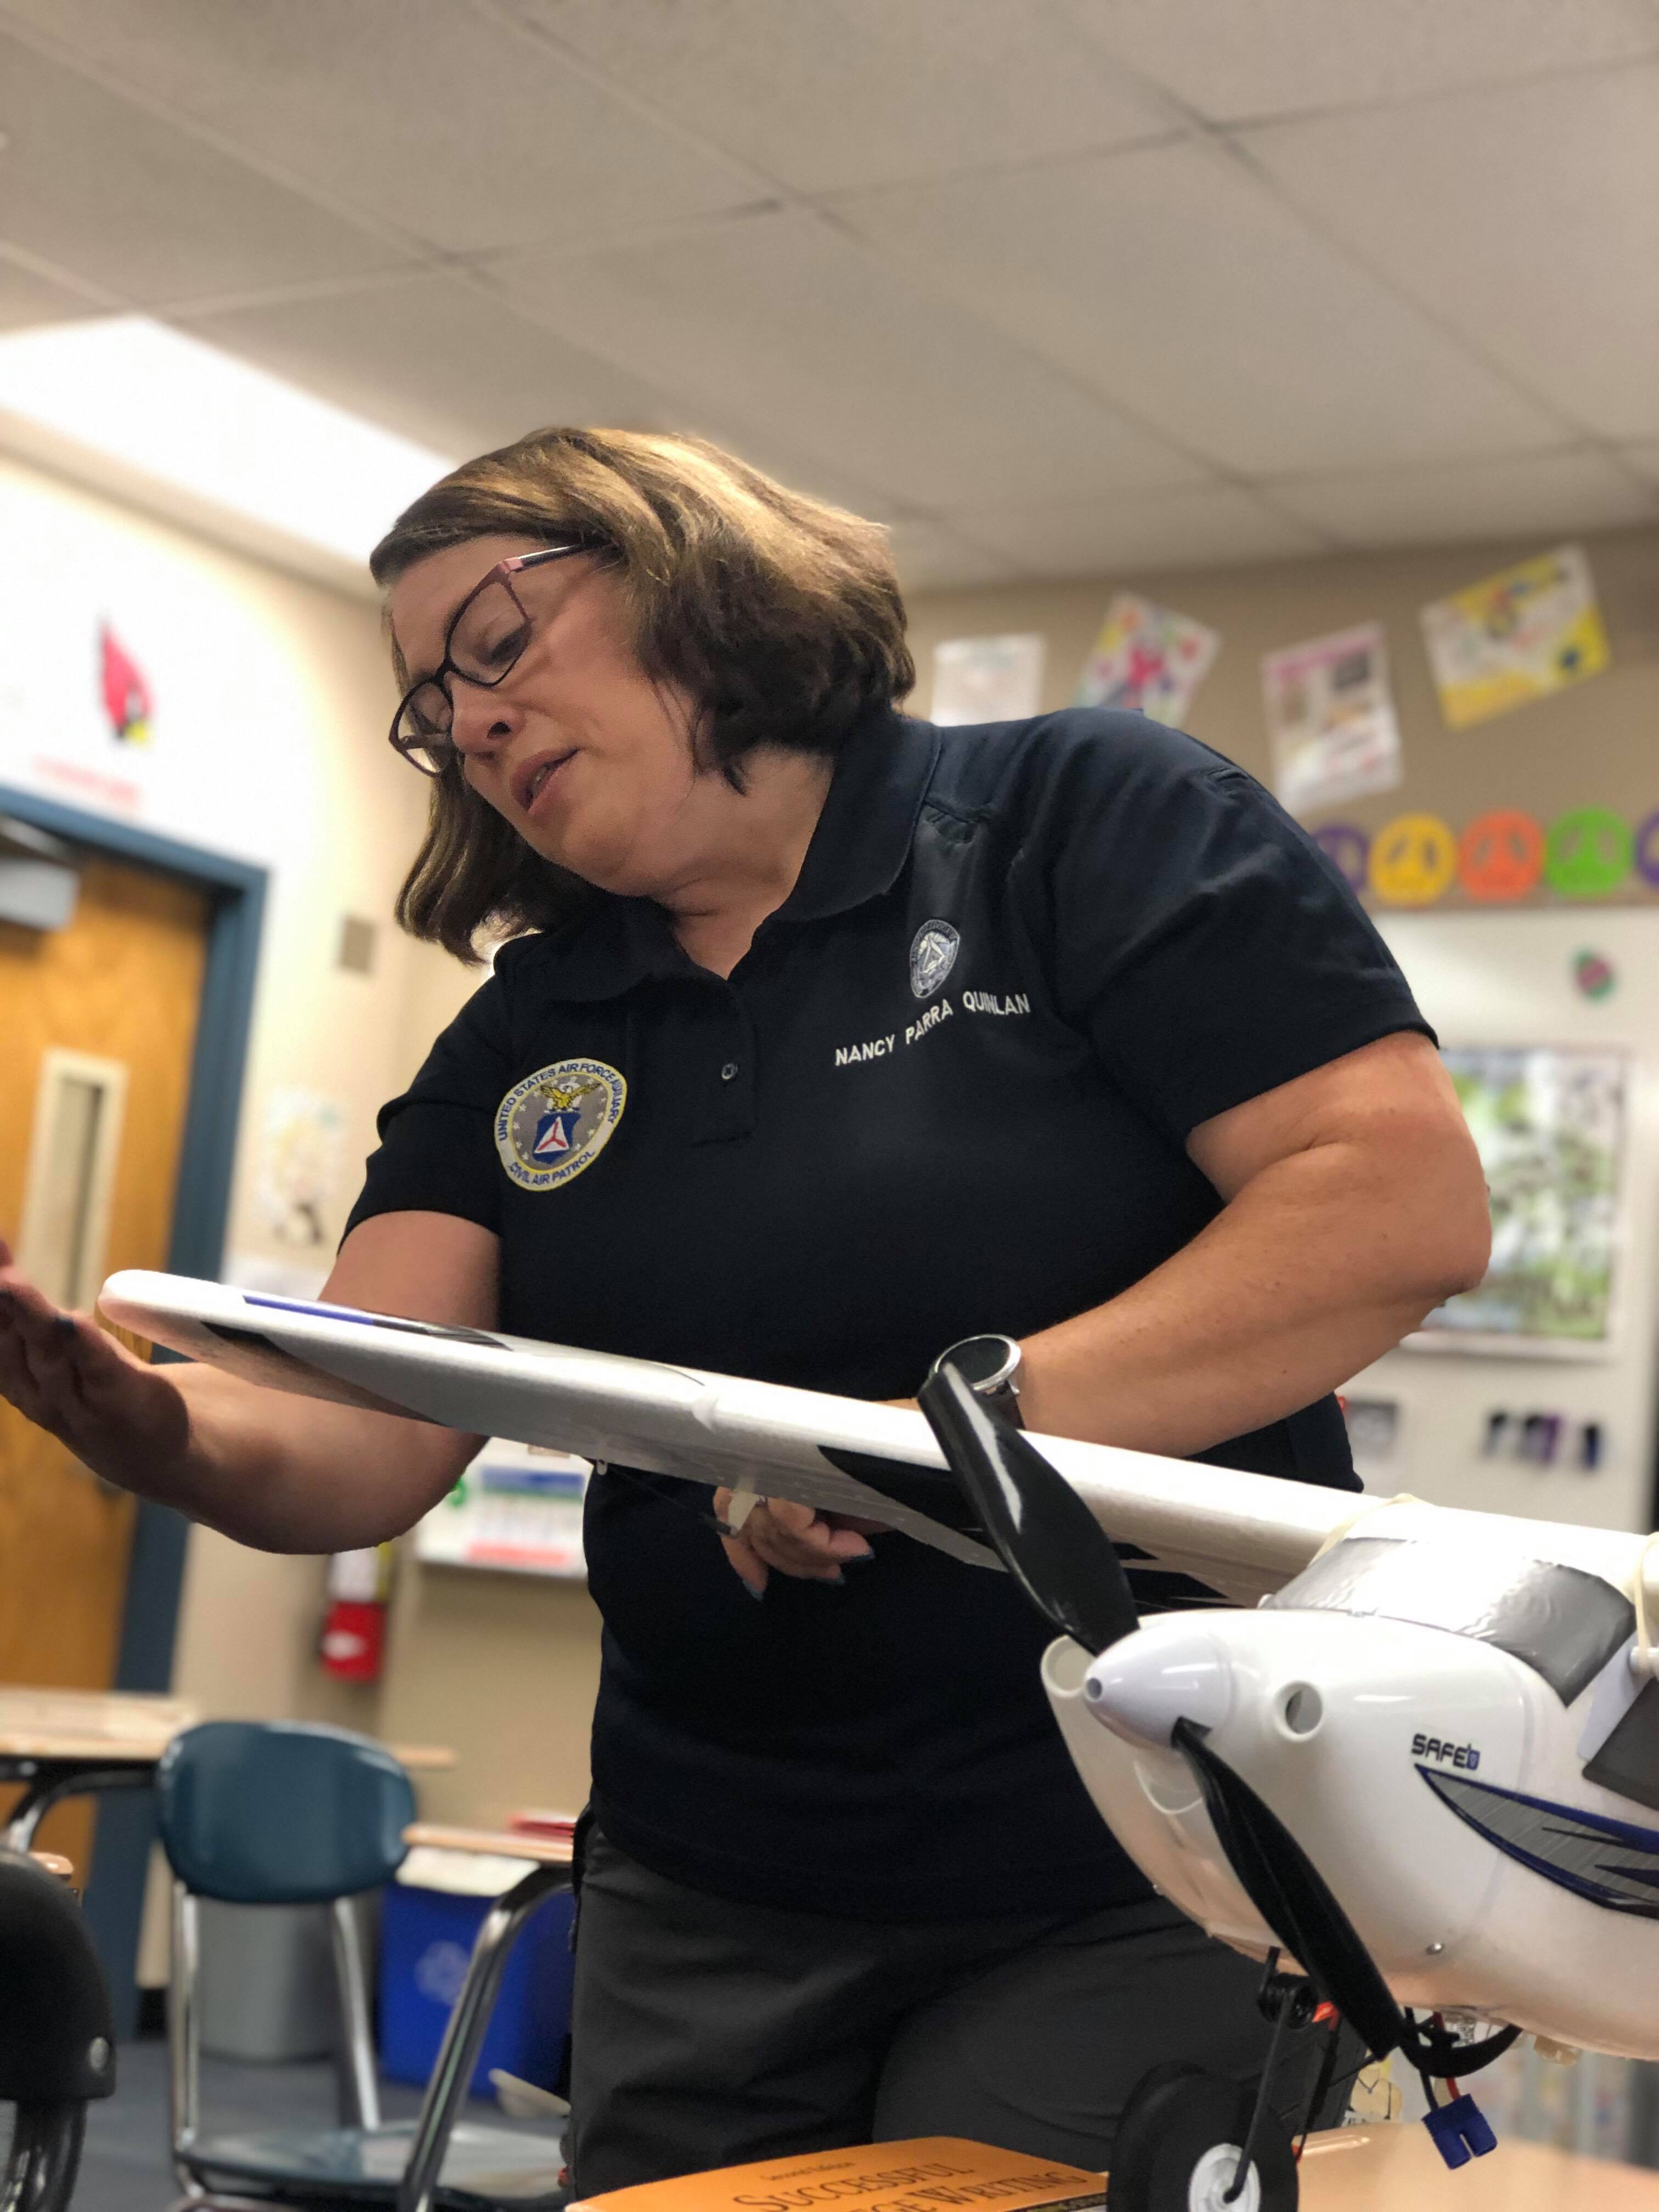 Capt. Nancy Parra-Quinlan work with the RC plane which sits on a deskin her classroom